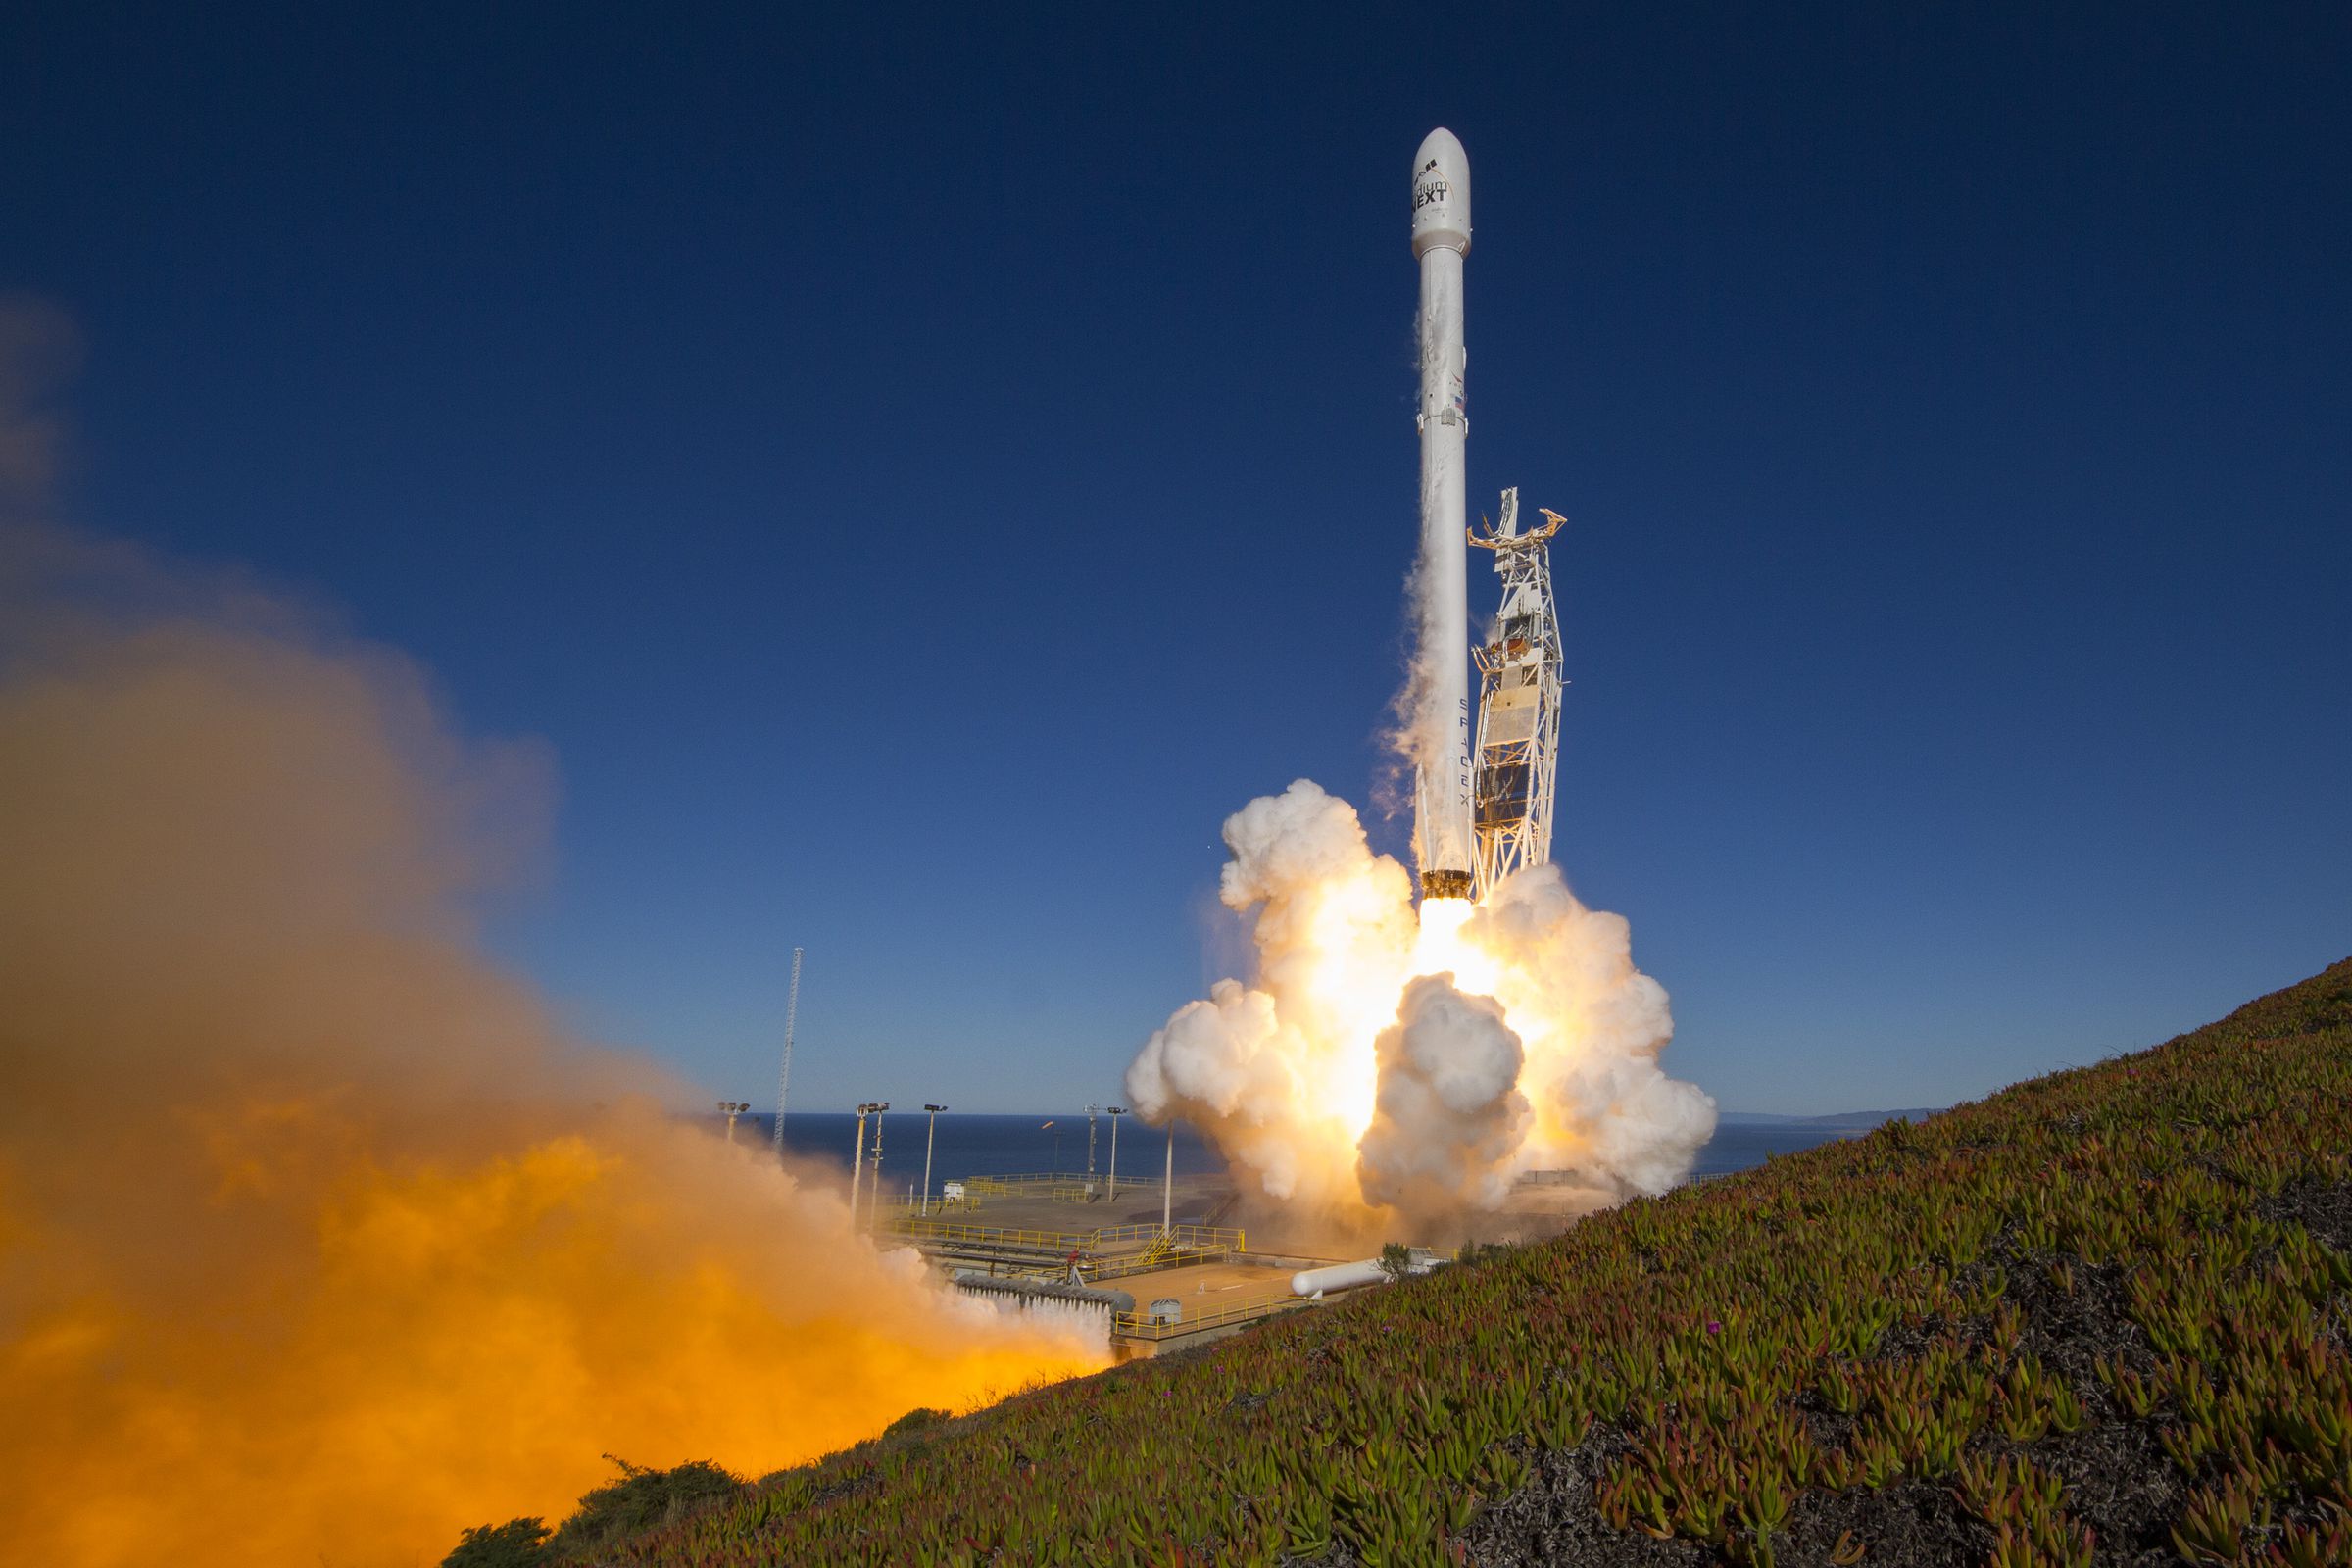 SpaceX successfully returned to flight after launching its Falcon 9 from Vandenberg Air Force Base.